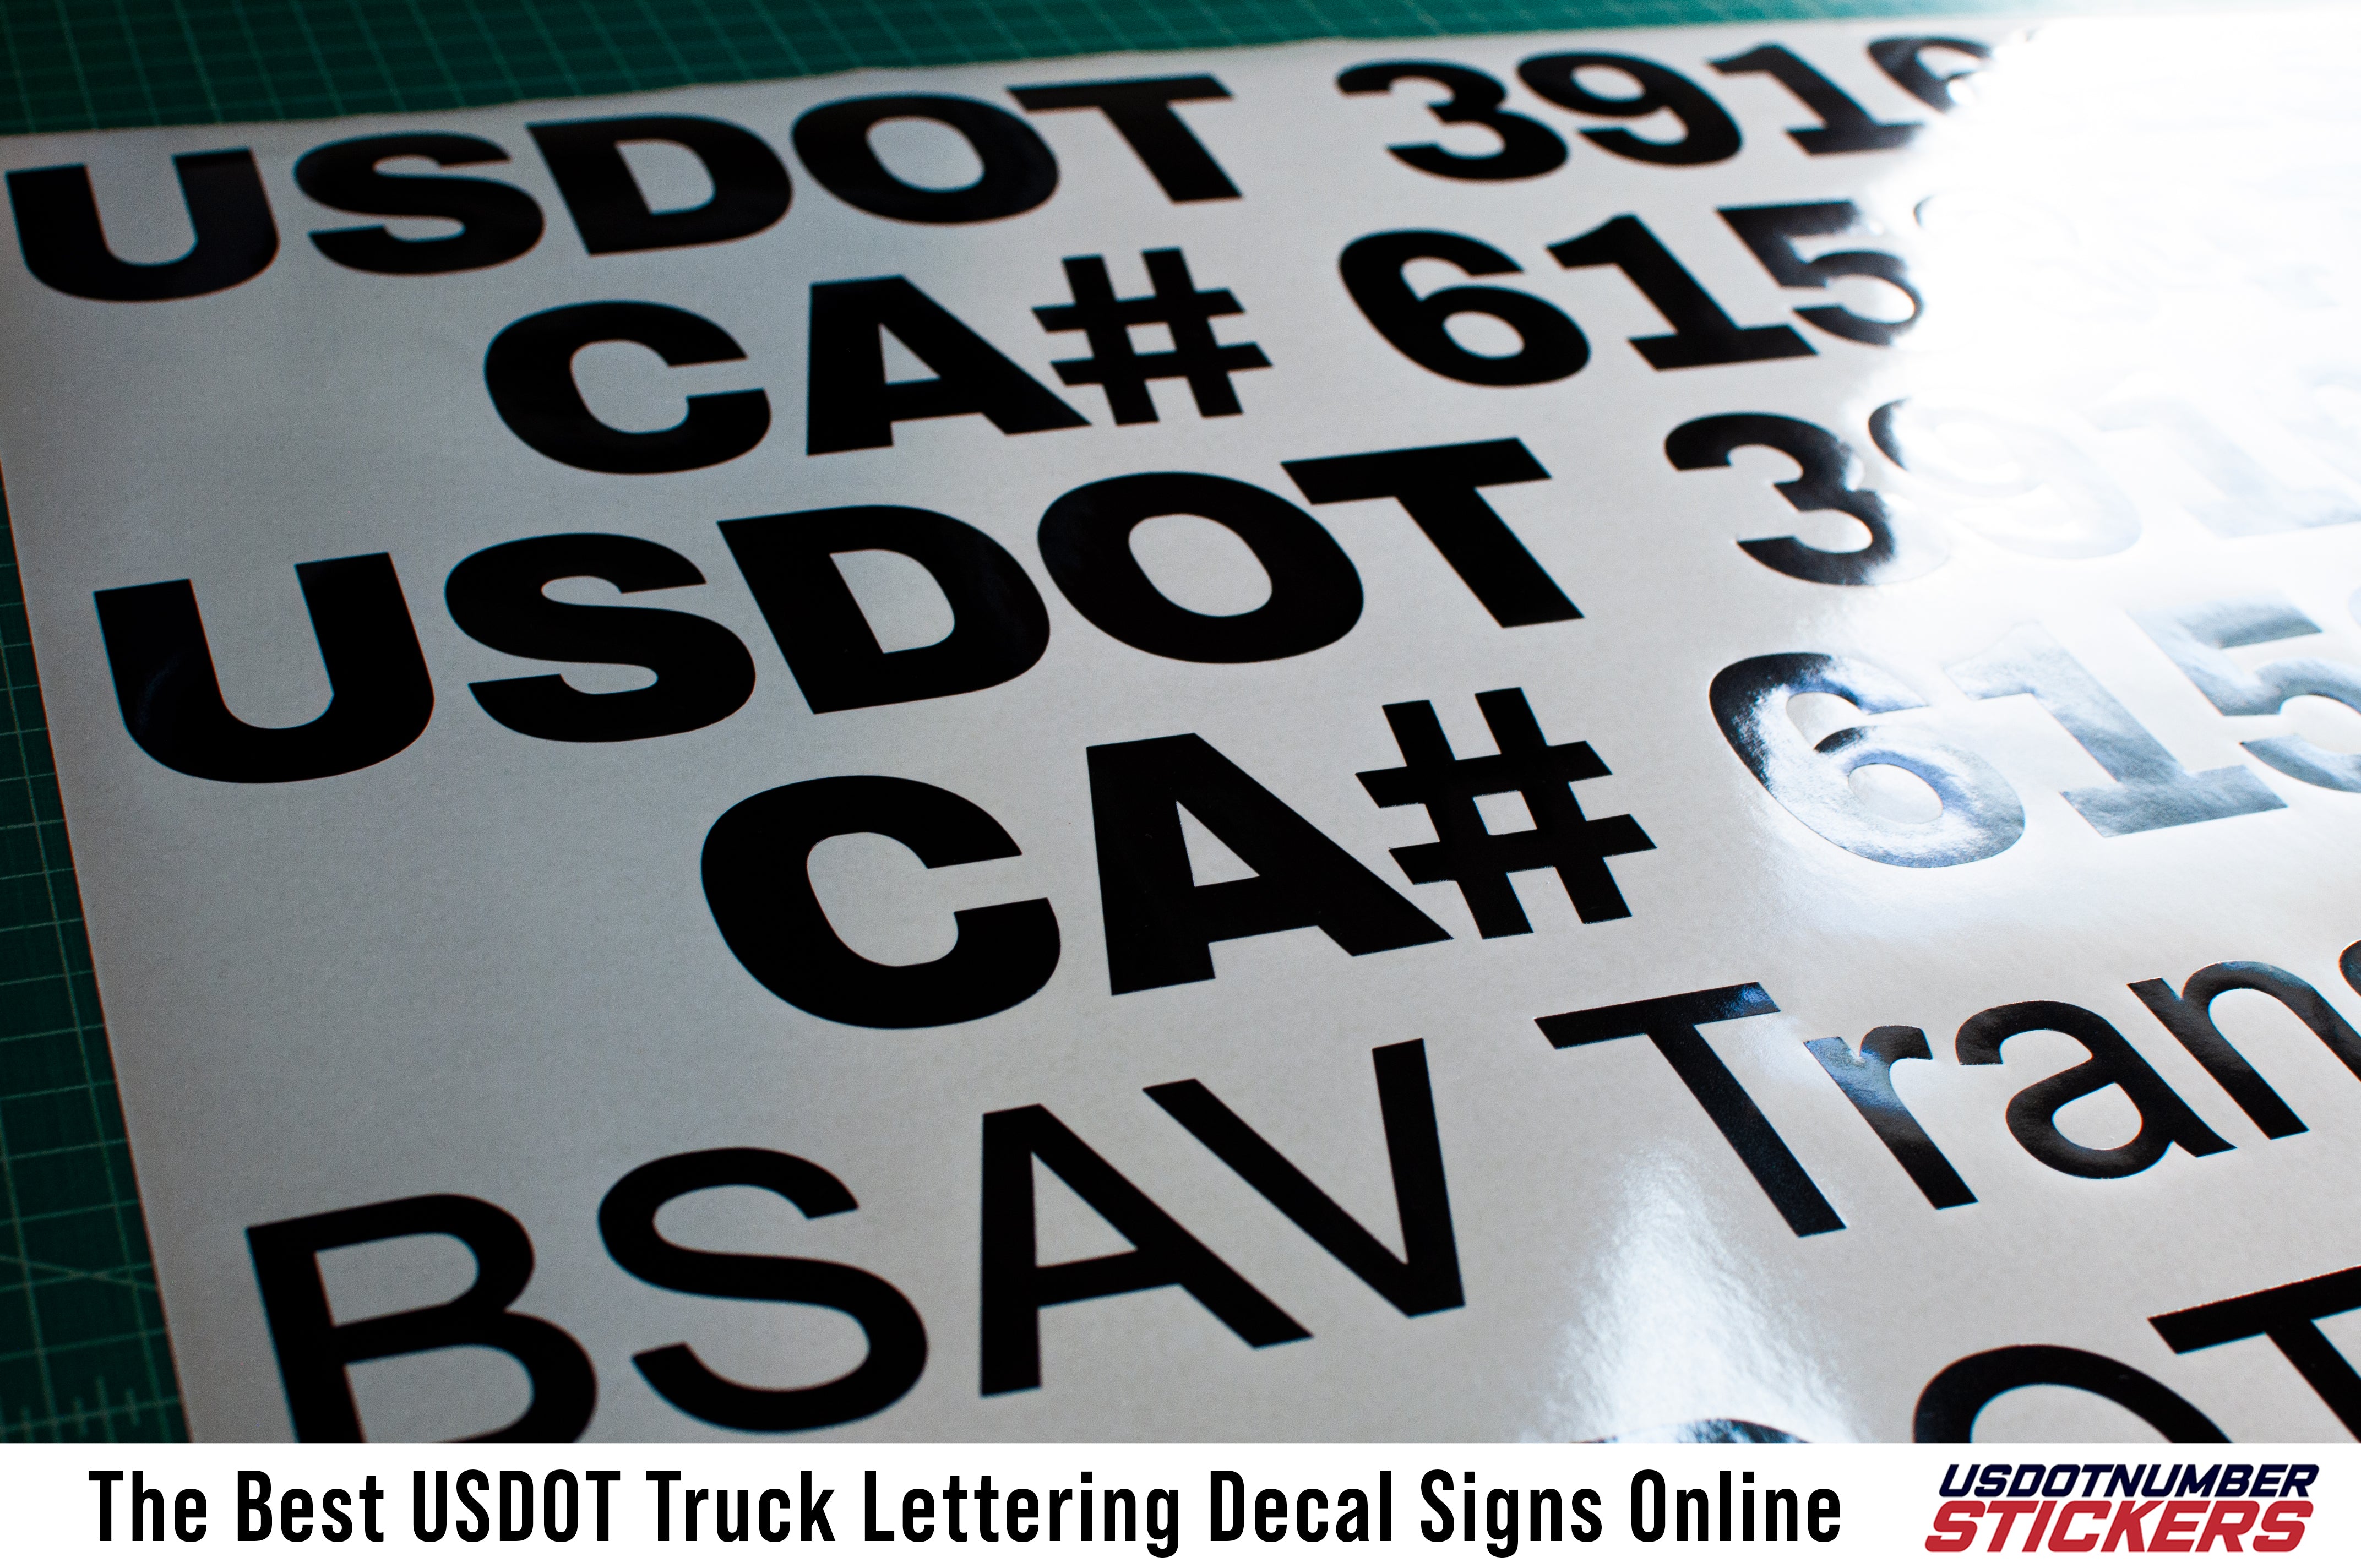 usdot ca number decal sticker lettering